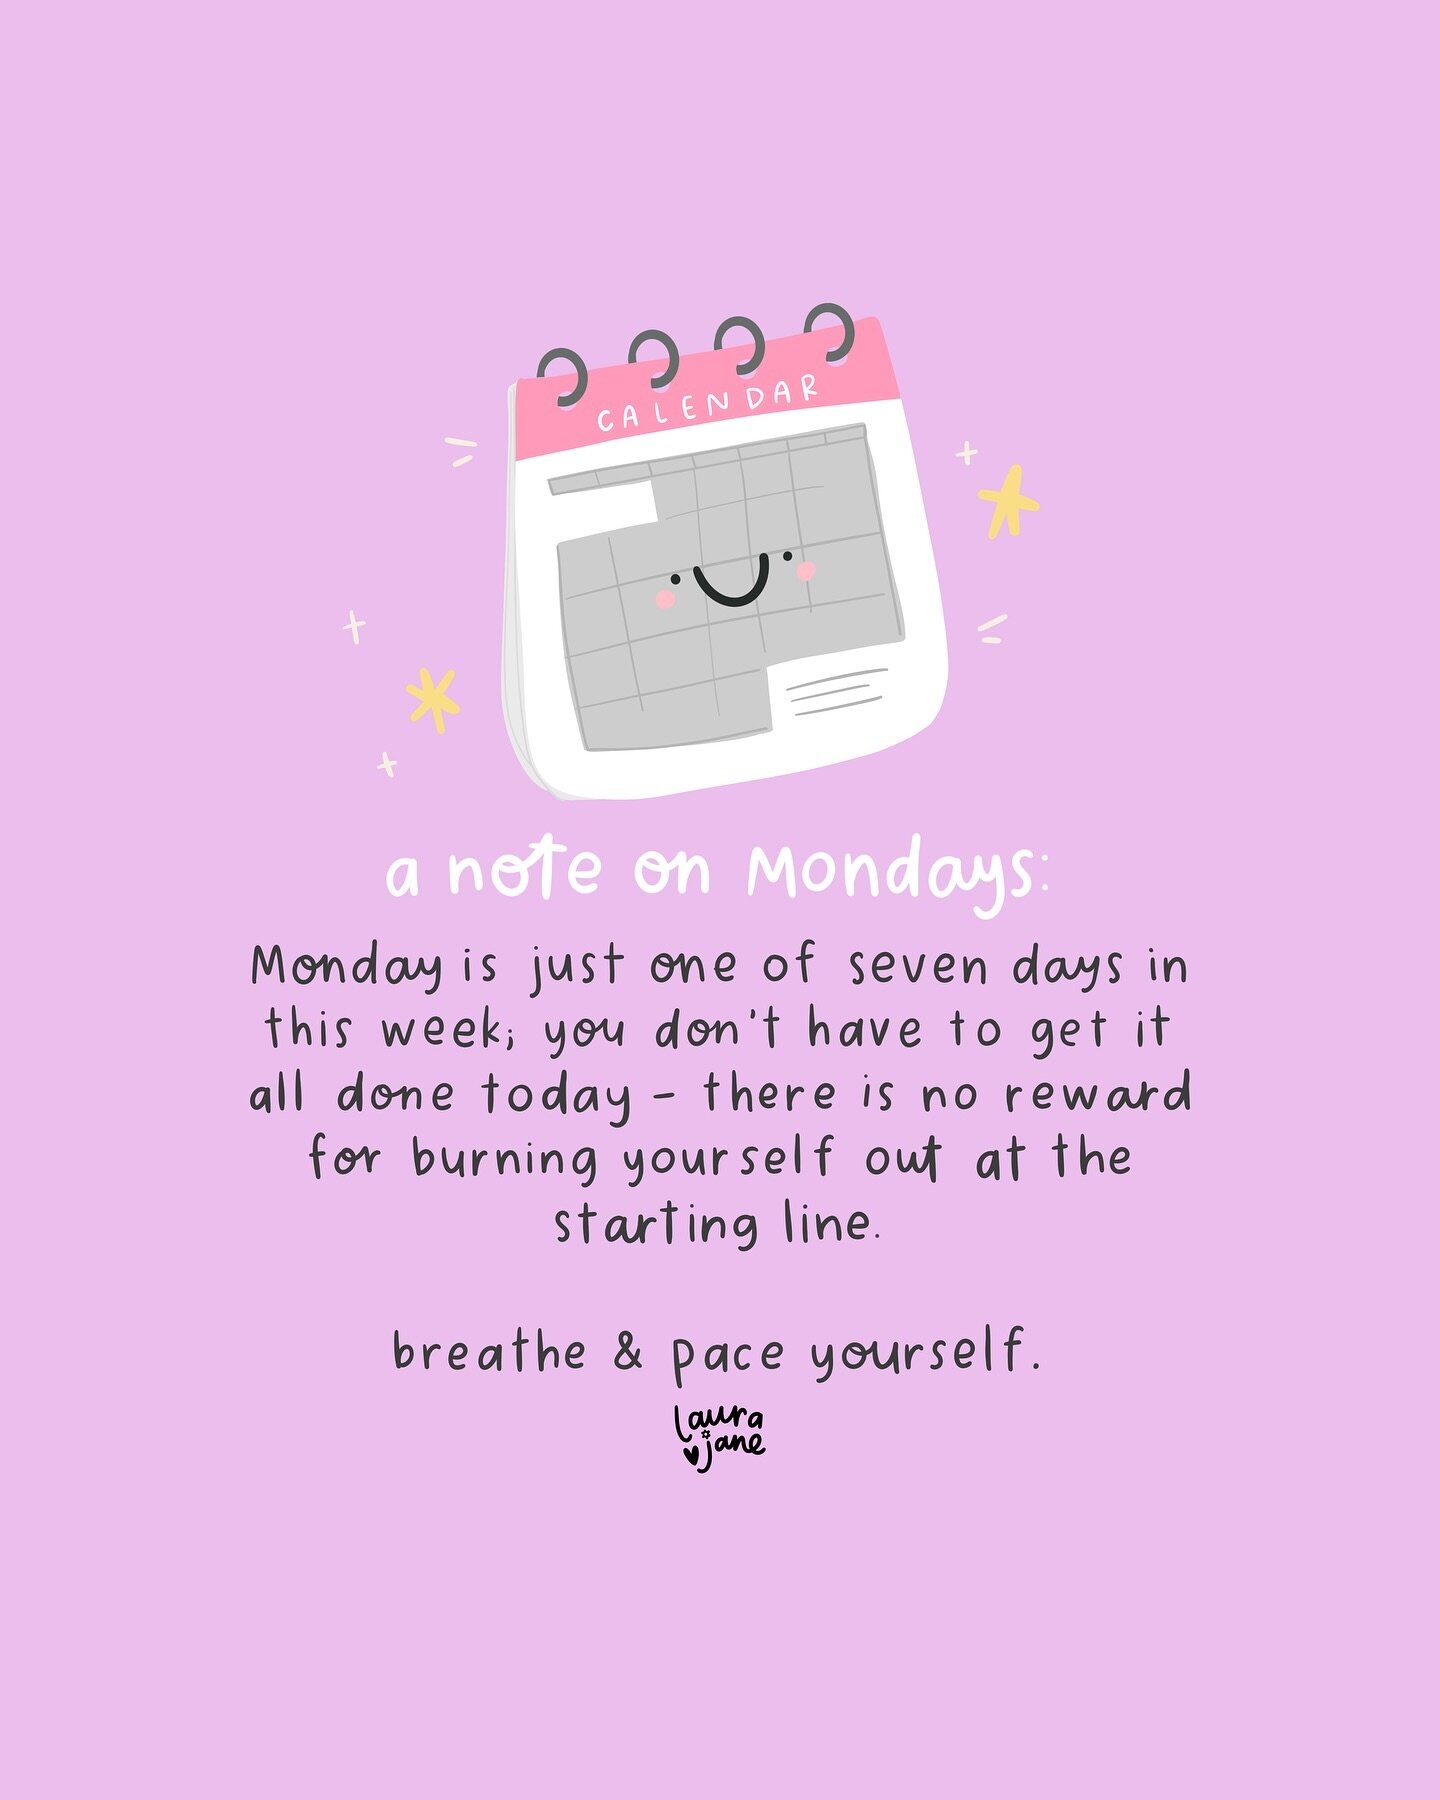 It&rsquo;s ONLY Monday - it&rsquo;s okay if there is still a tonne of stuff left on your to-do list at the end of the day.

You can&rsquo;t do all of the things in one day and if you burn yourself out trying, you won&rsquo;t be able to do anything el